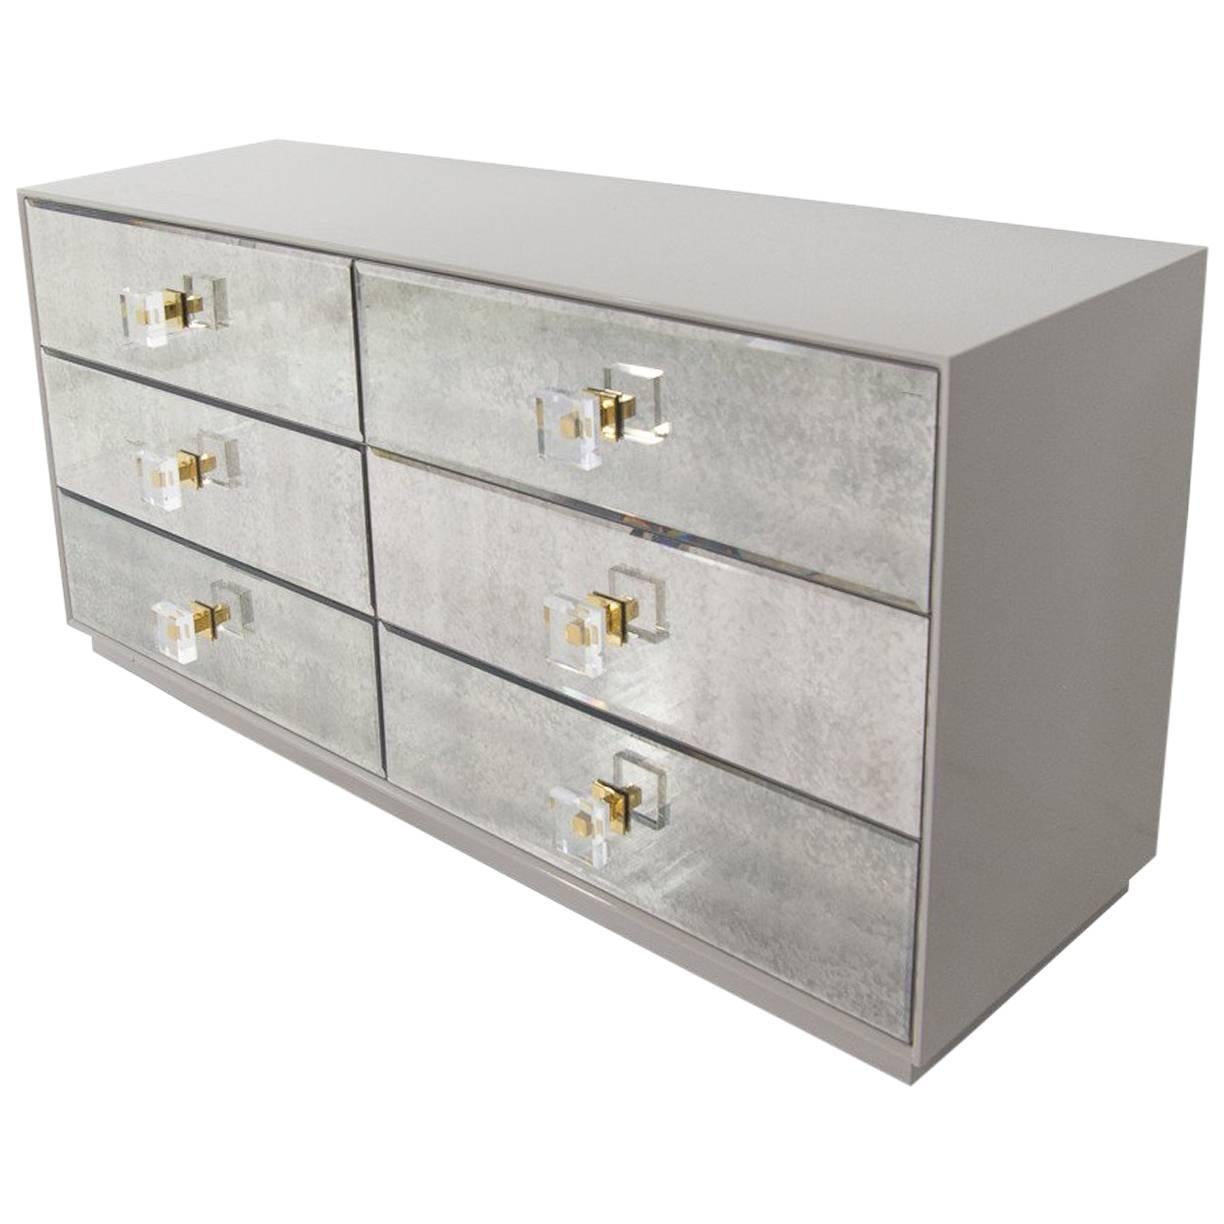 Storage Dresser in Greystone Lacquer with Antique Mirror Drawers & Lucite Pulls For Sale